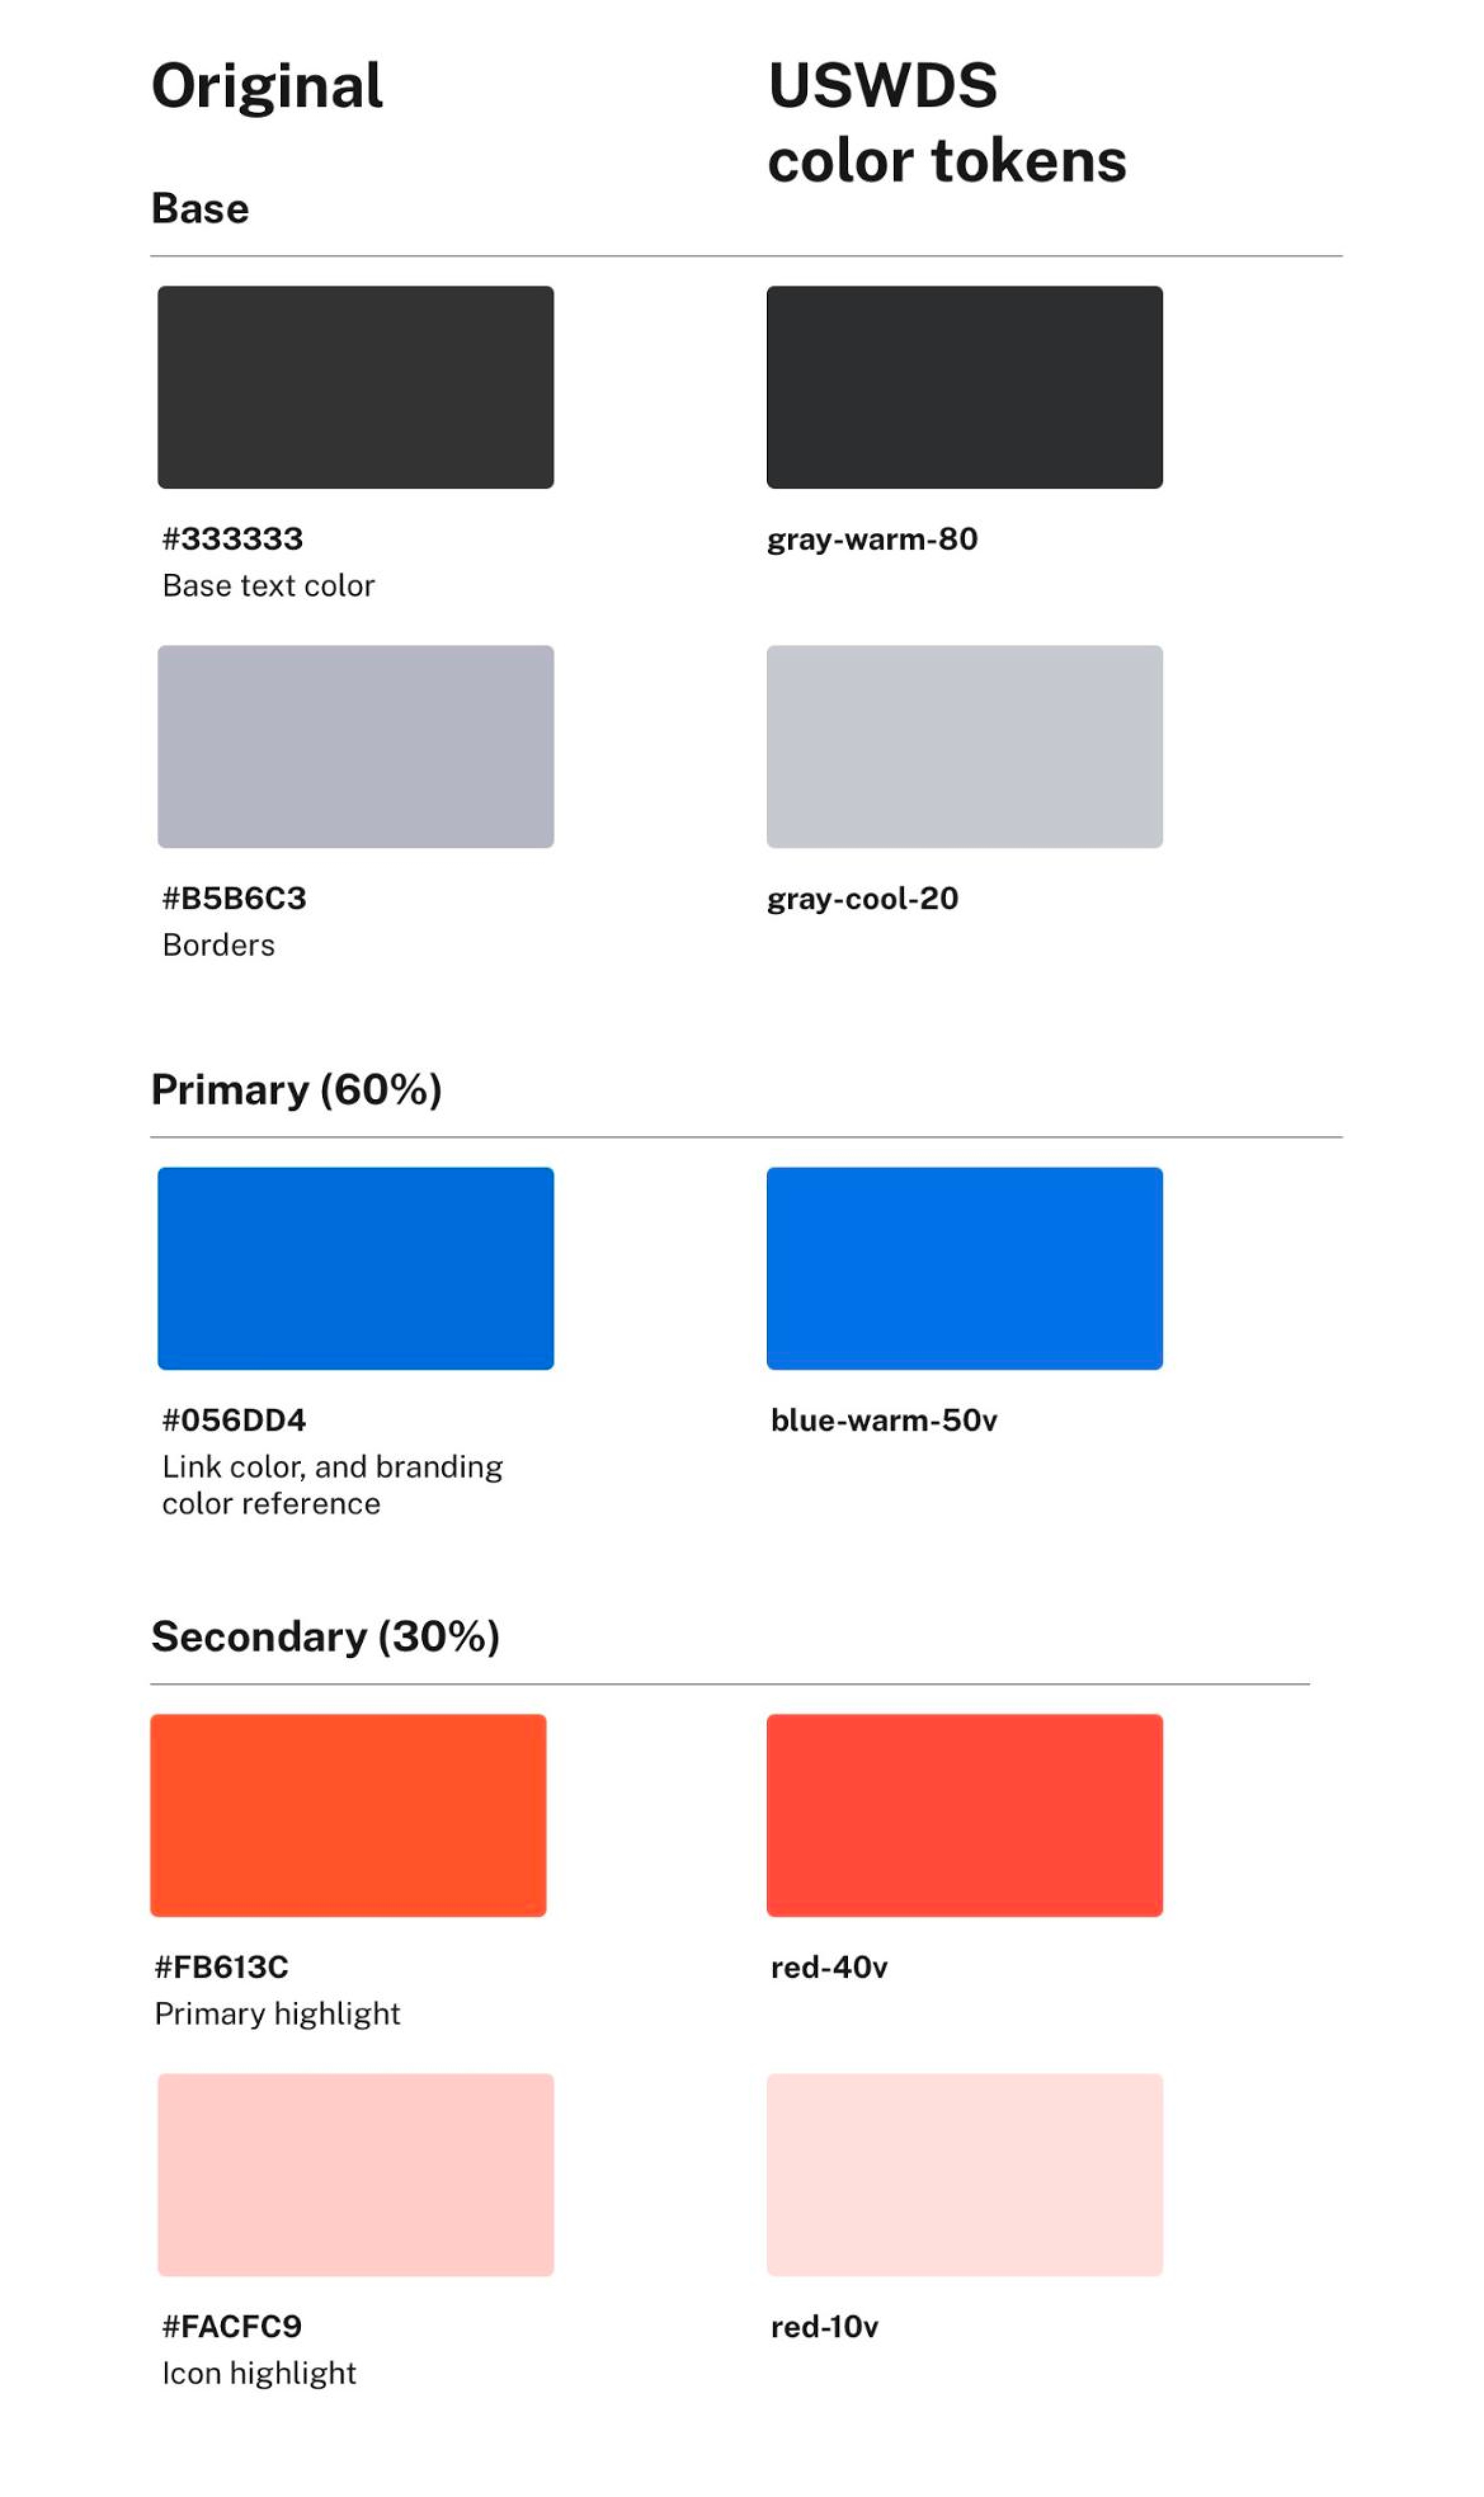 A screenshot of a design file showing how multiple colors from cloud.gov's original color palette map to USWDS color tokens.